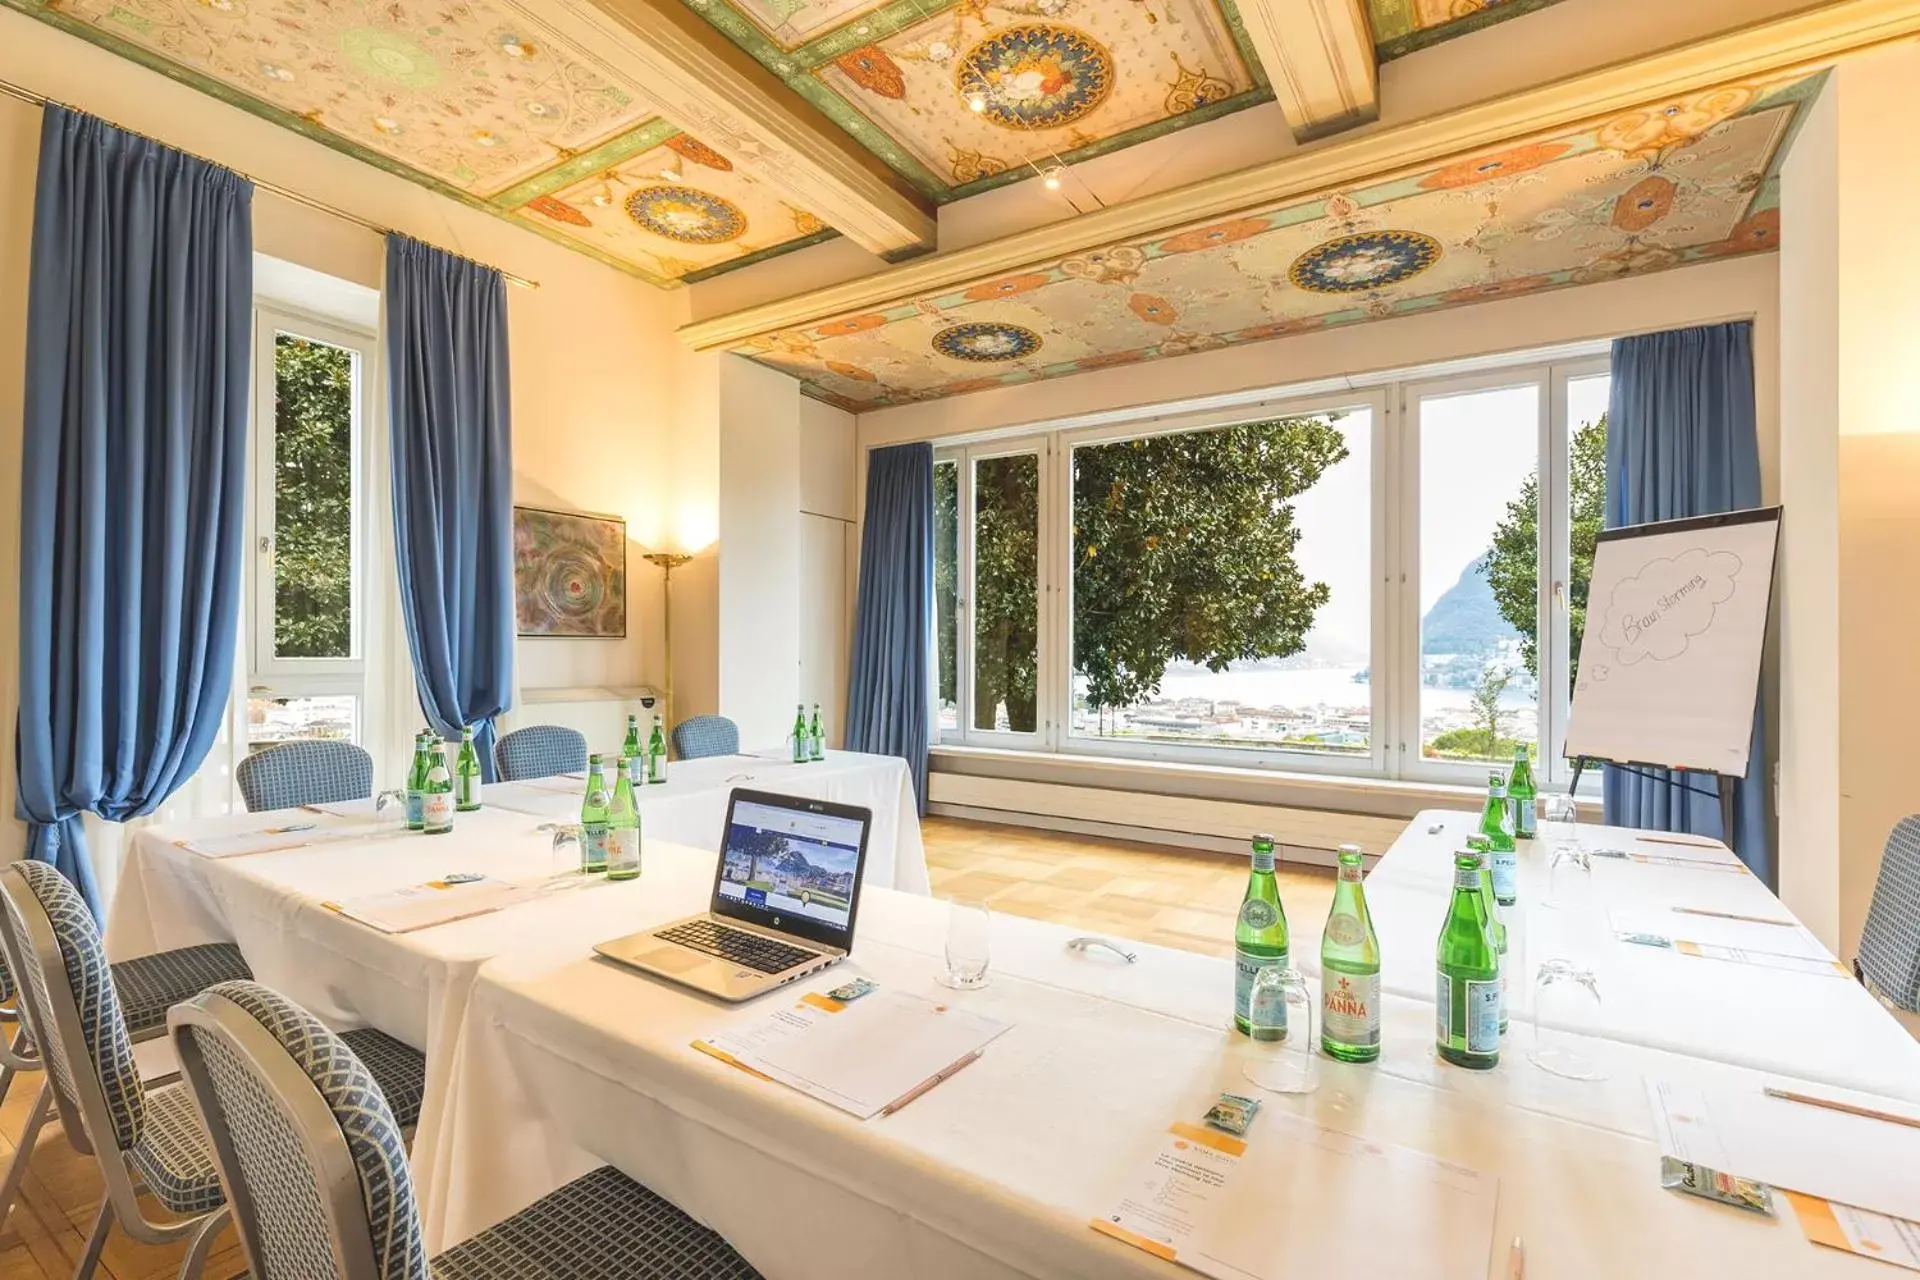 Meeting/conference room in Villa Sassa Hotel, Residence & Spa - Ticino Hotels Group